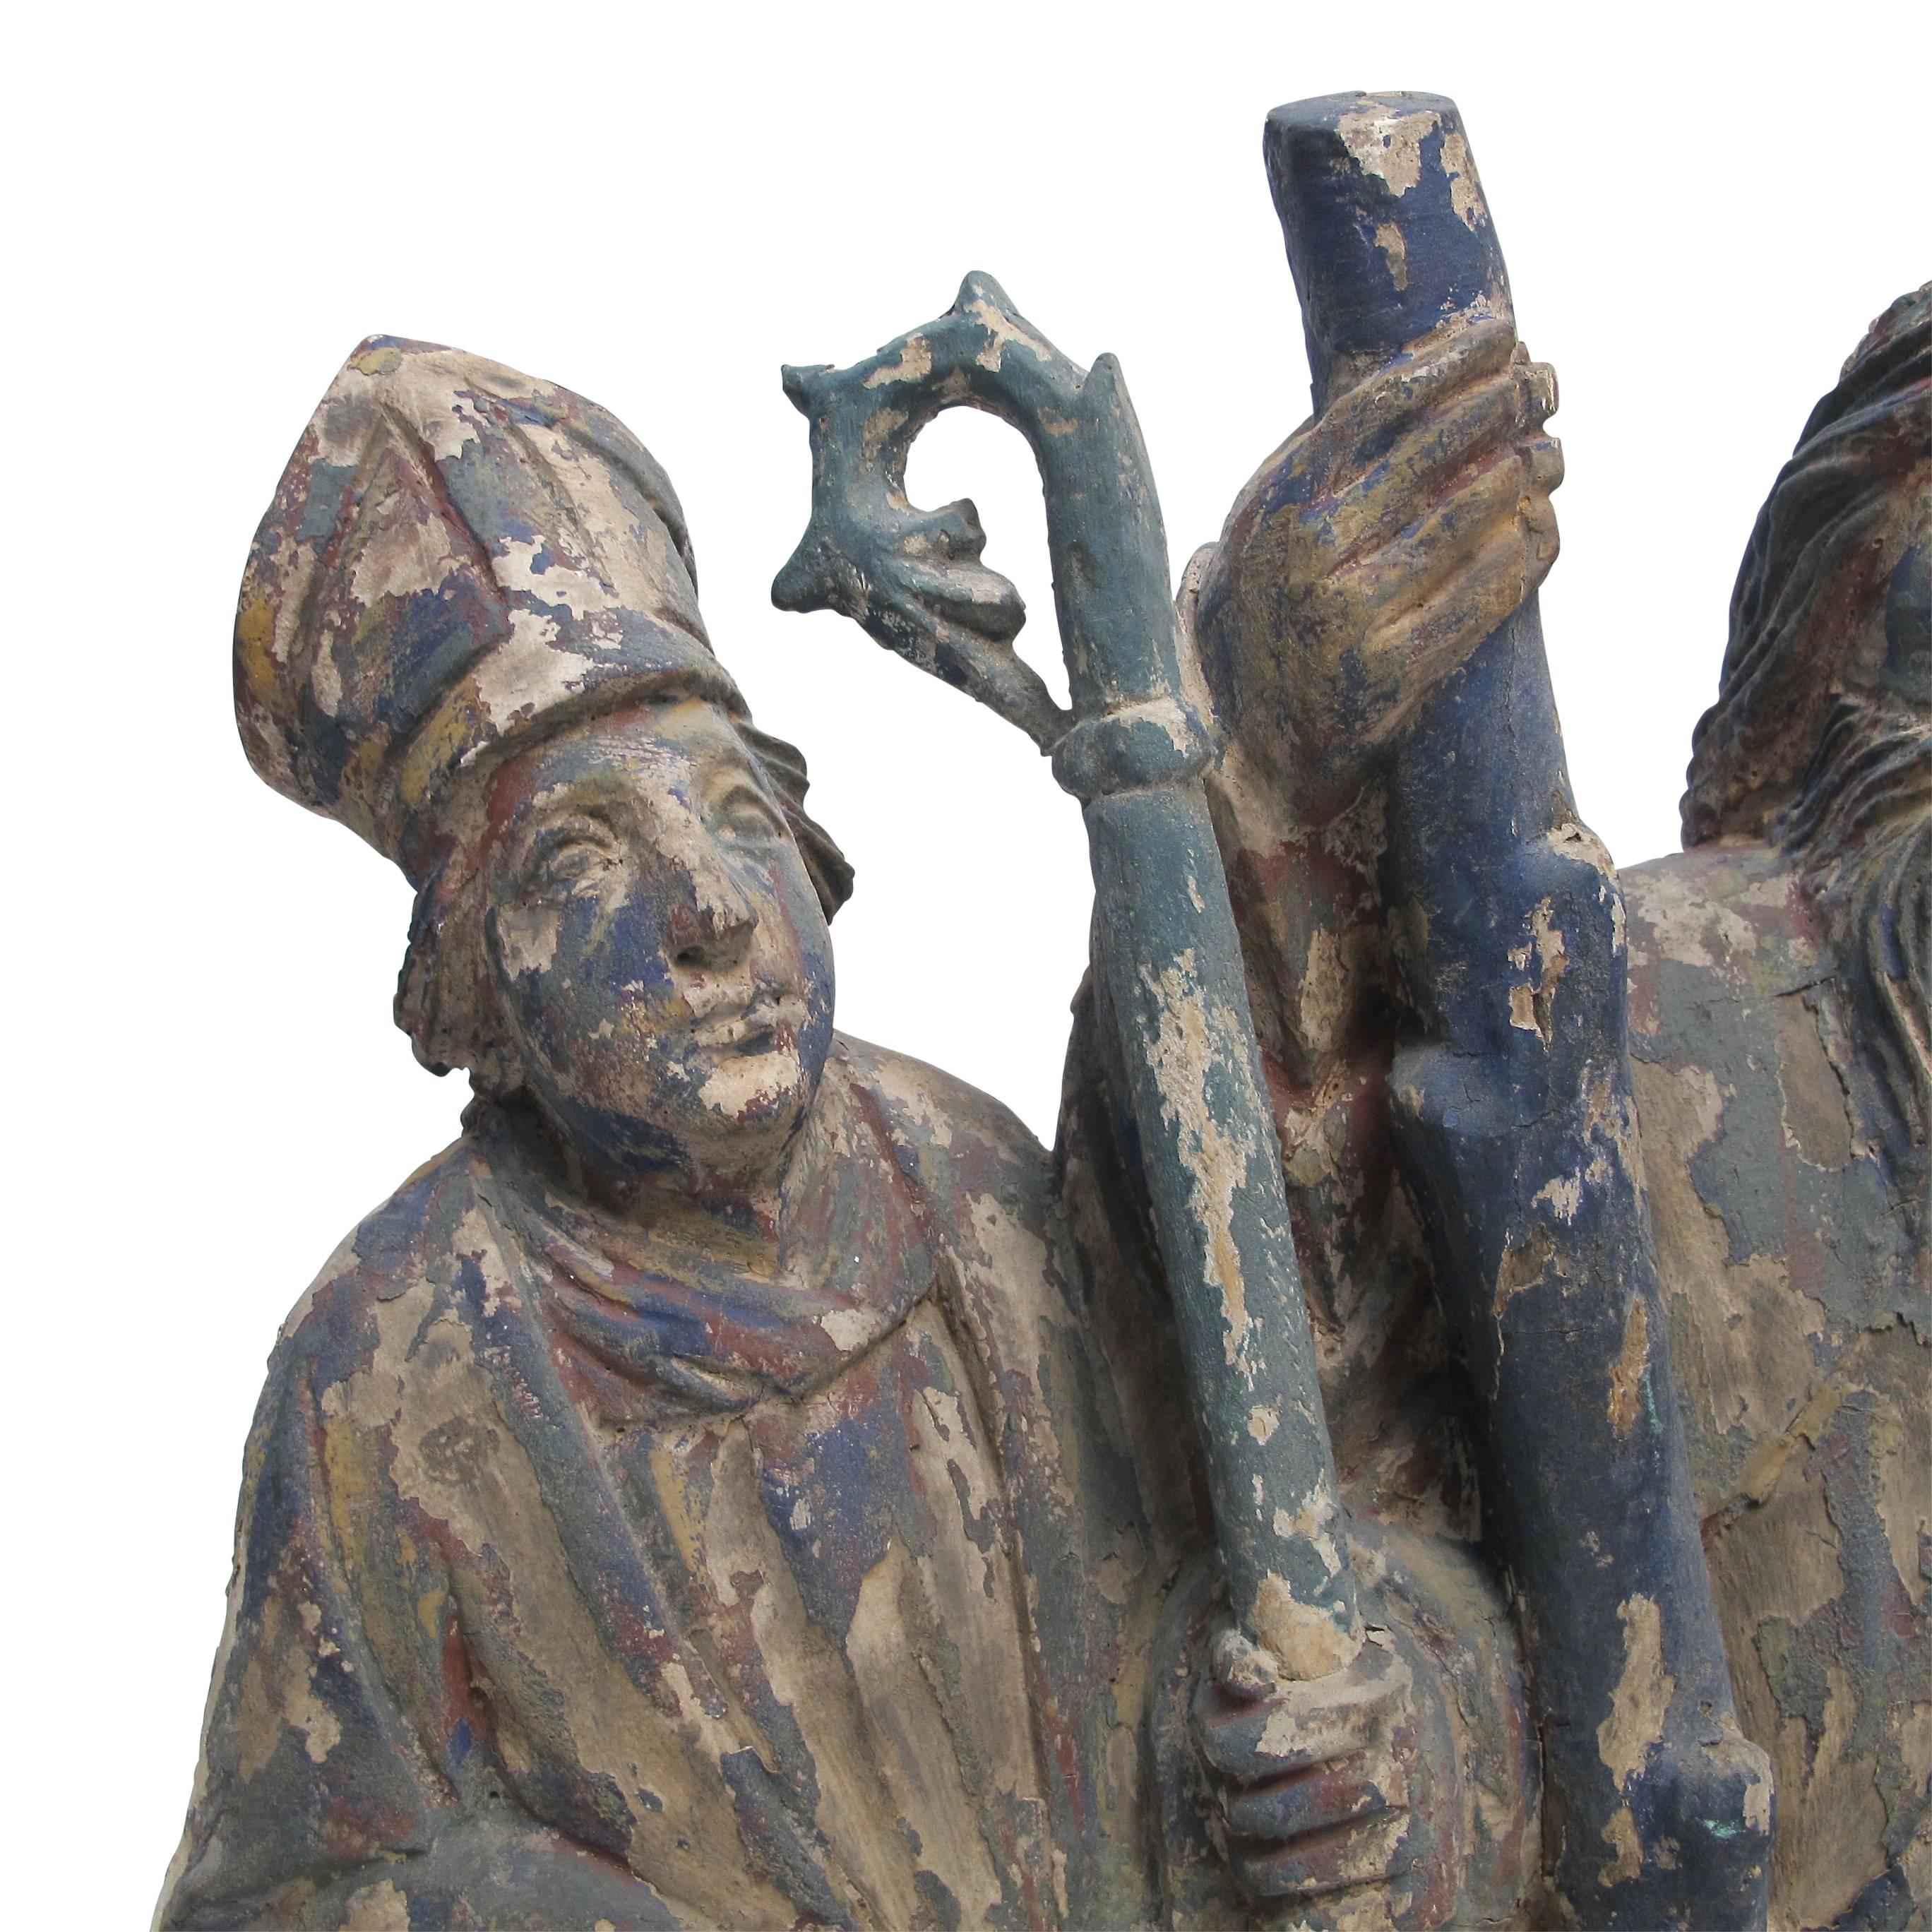 Spanish Colonial carving of three saint figures, having remnants of original old paint, Mexico, early to mid-19th century.